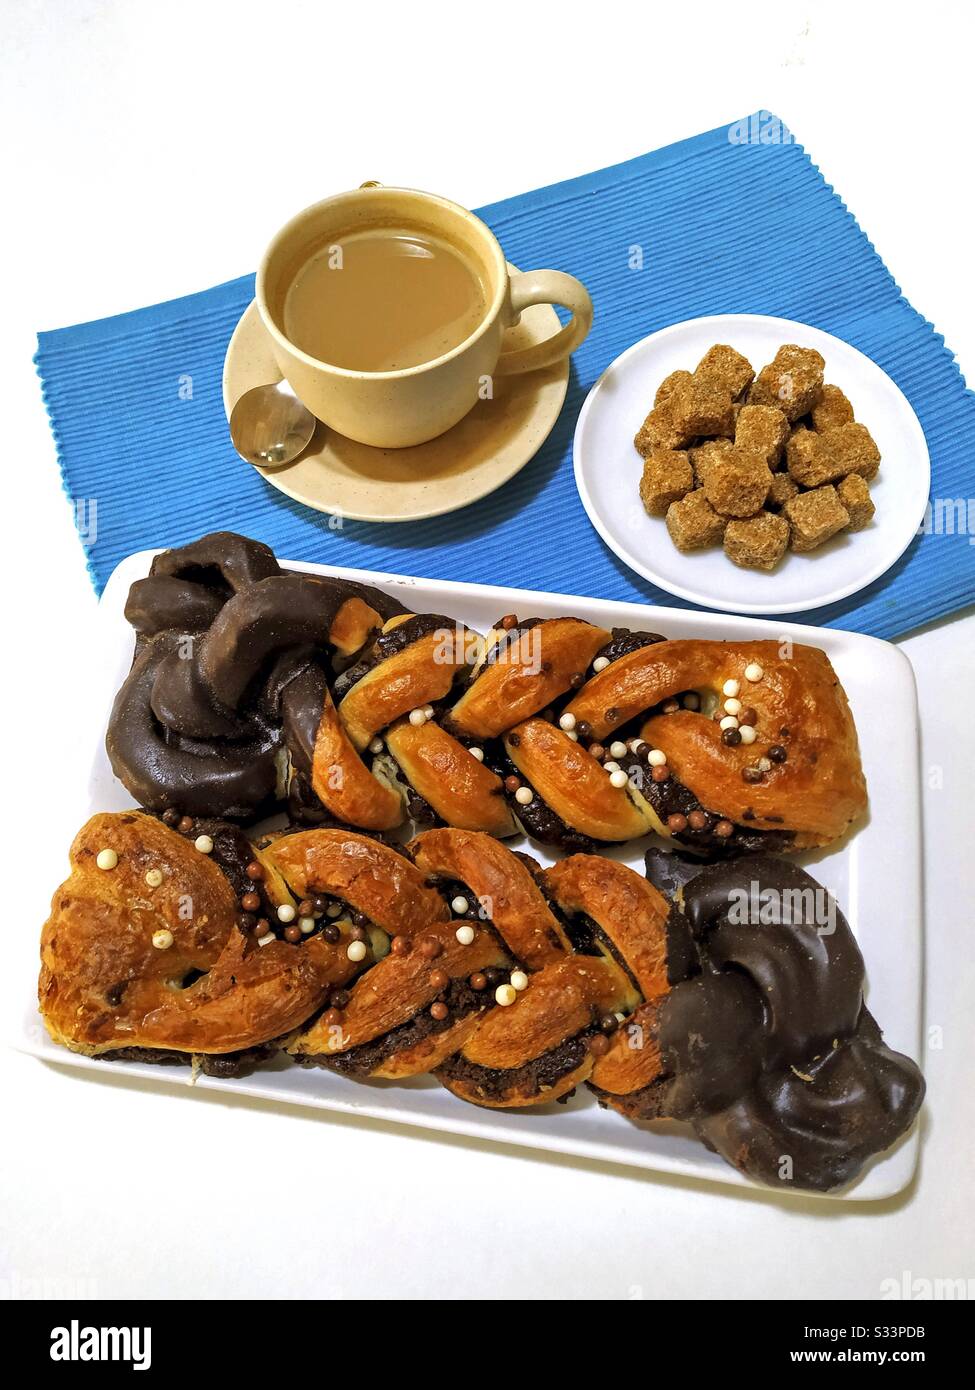 Breakfast. White coffee and pastries. Stock Photo